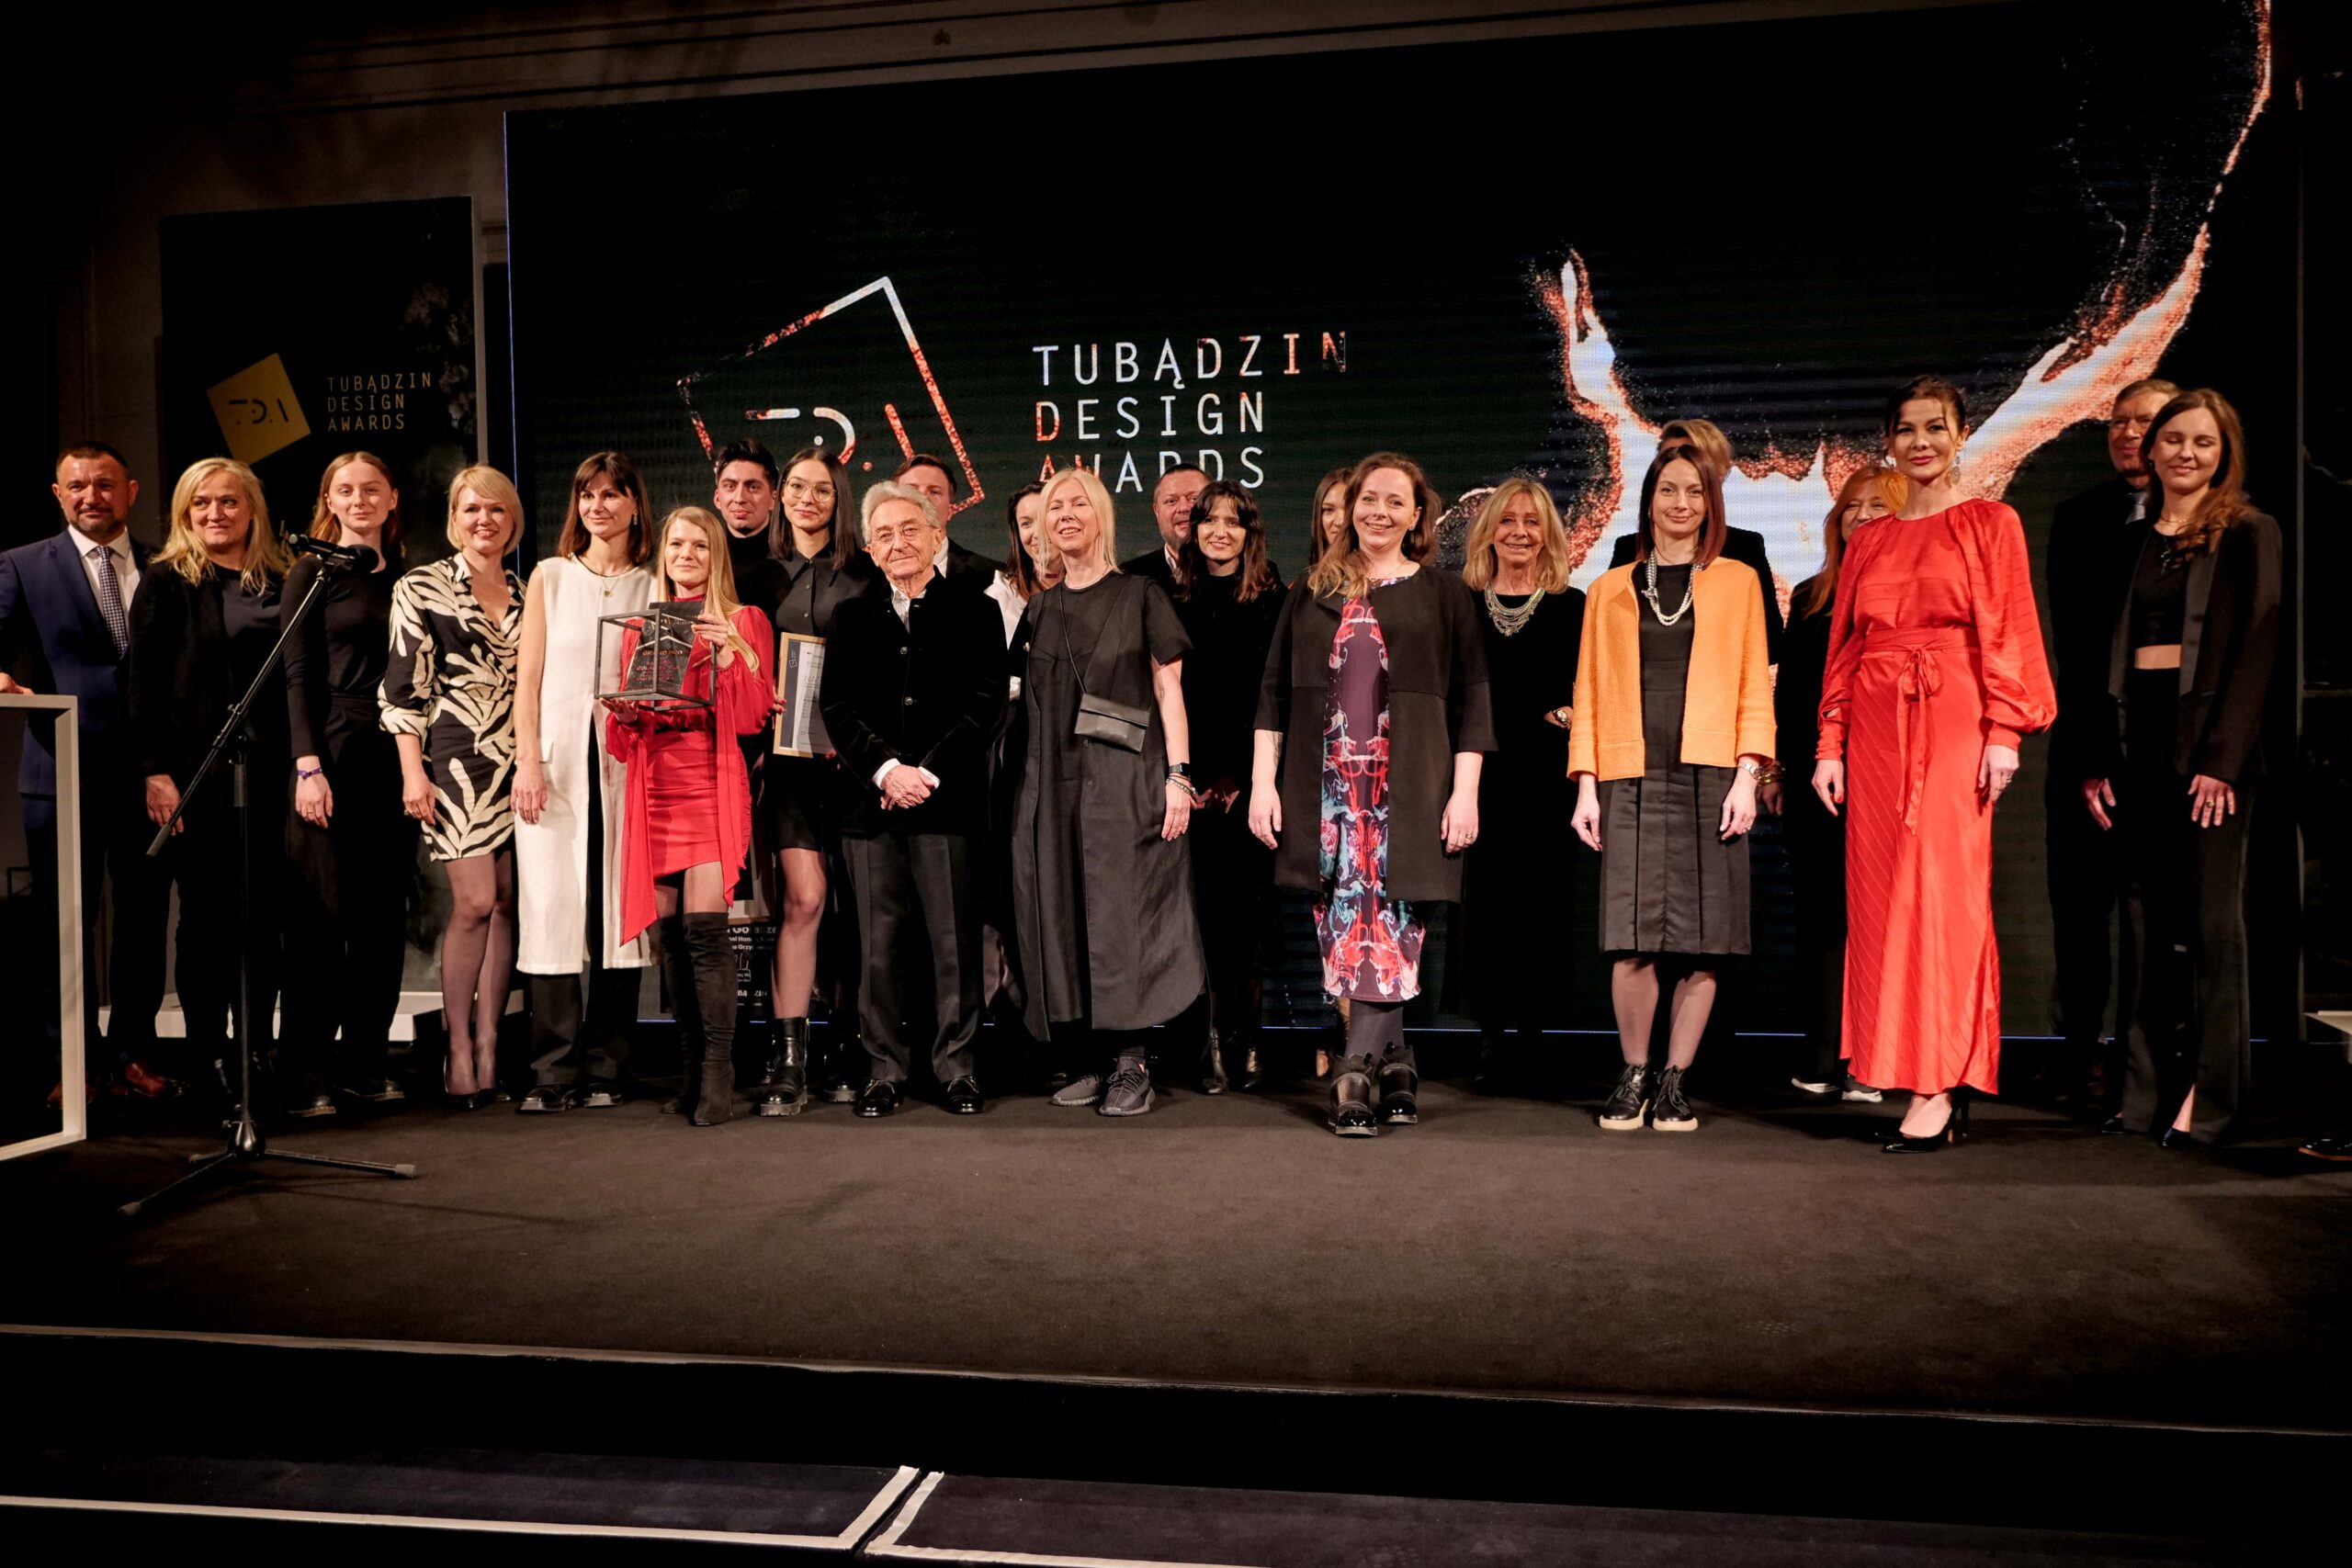 Grand finale of the fourth edition of the Tubądzin Design Awards at the Teatr Wielki – National Opera in Warsaw